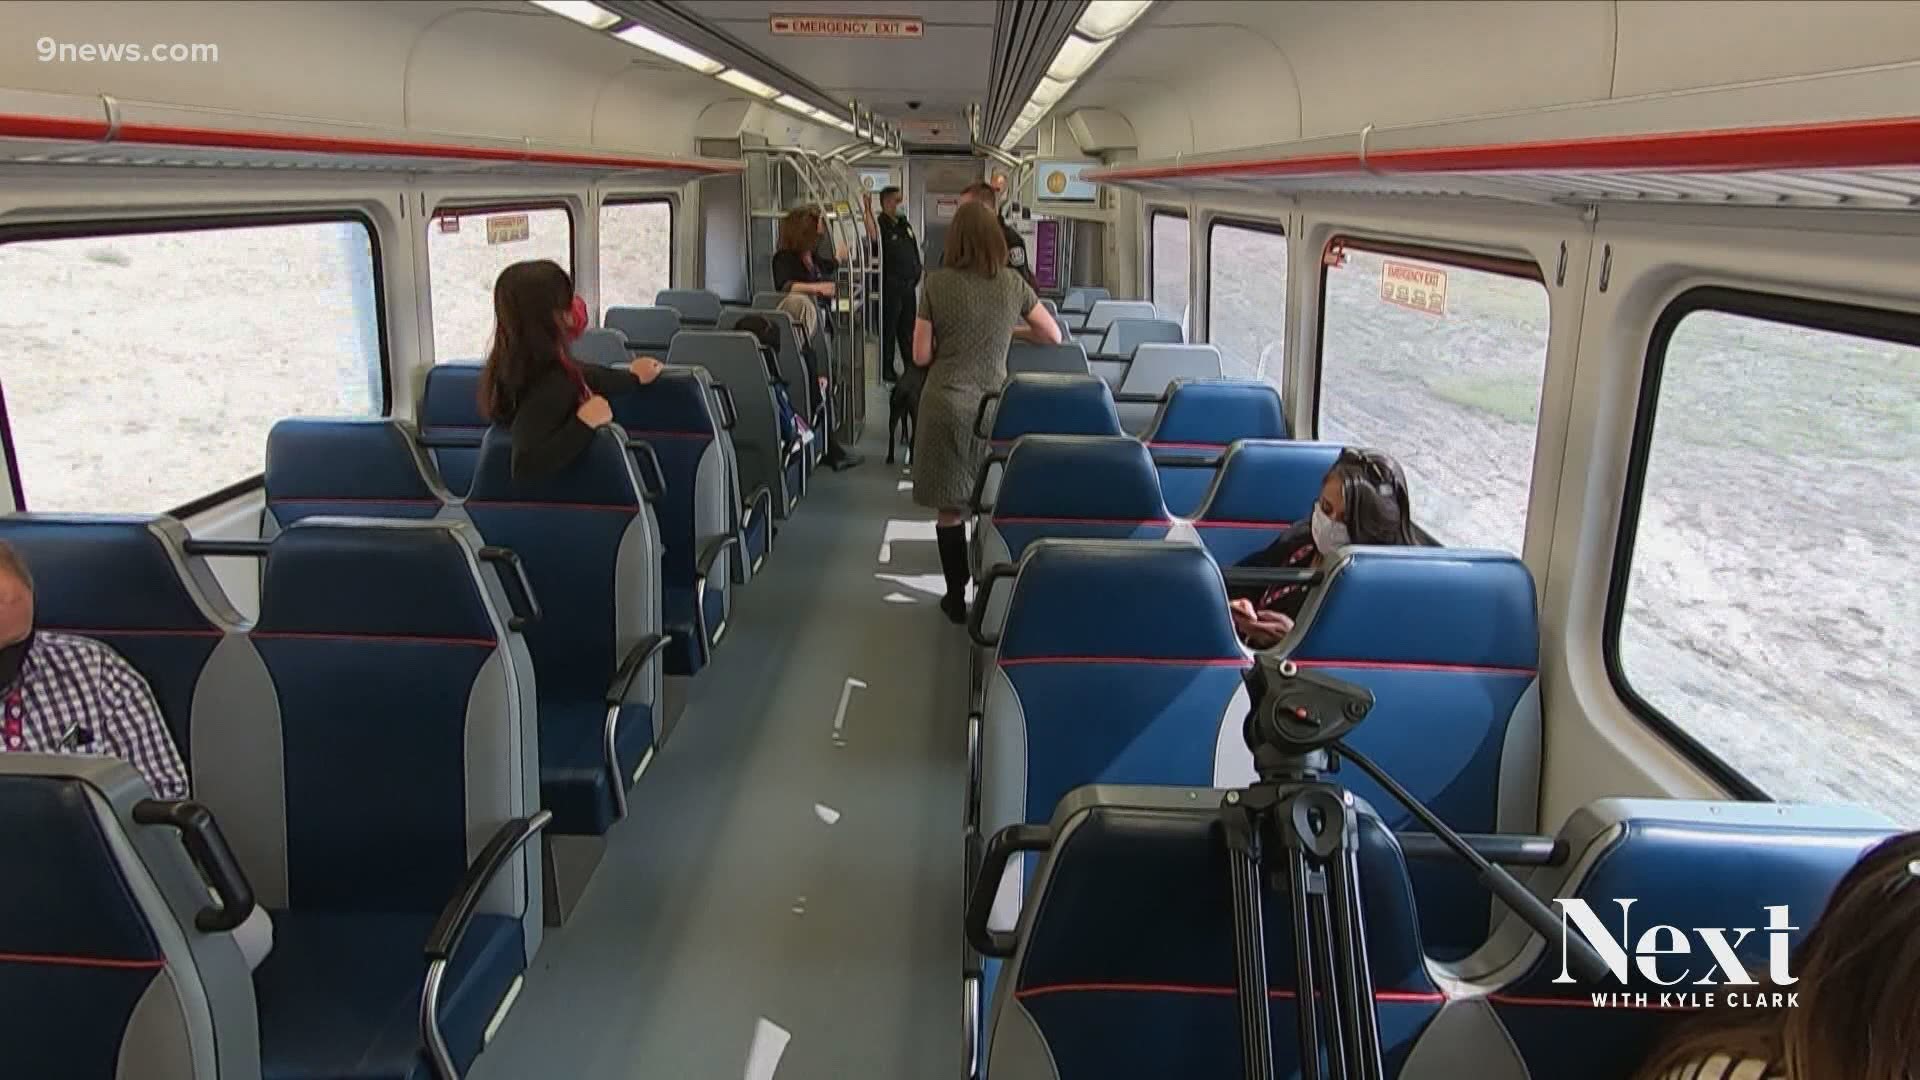 The governor says he wants the promised Longmont train in four years, but RTD says it will take at least 30 years, if it happens at all. So, now what?